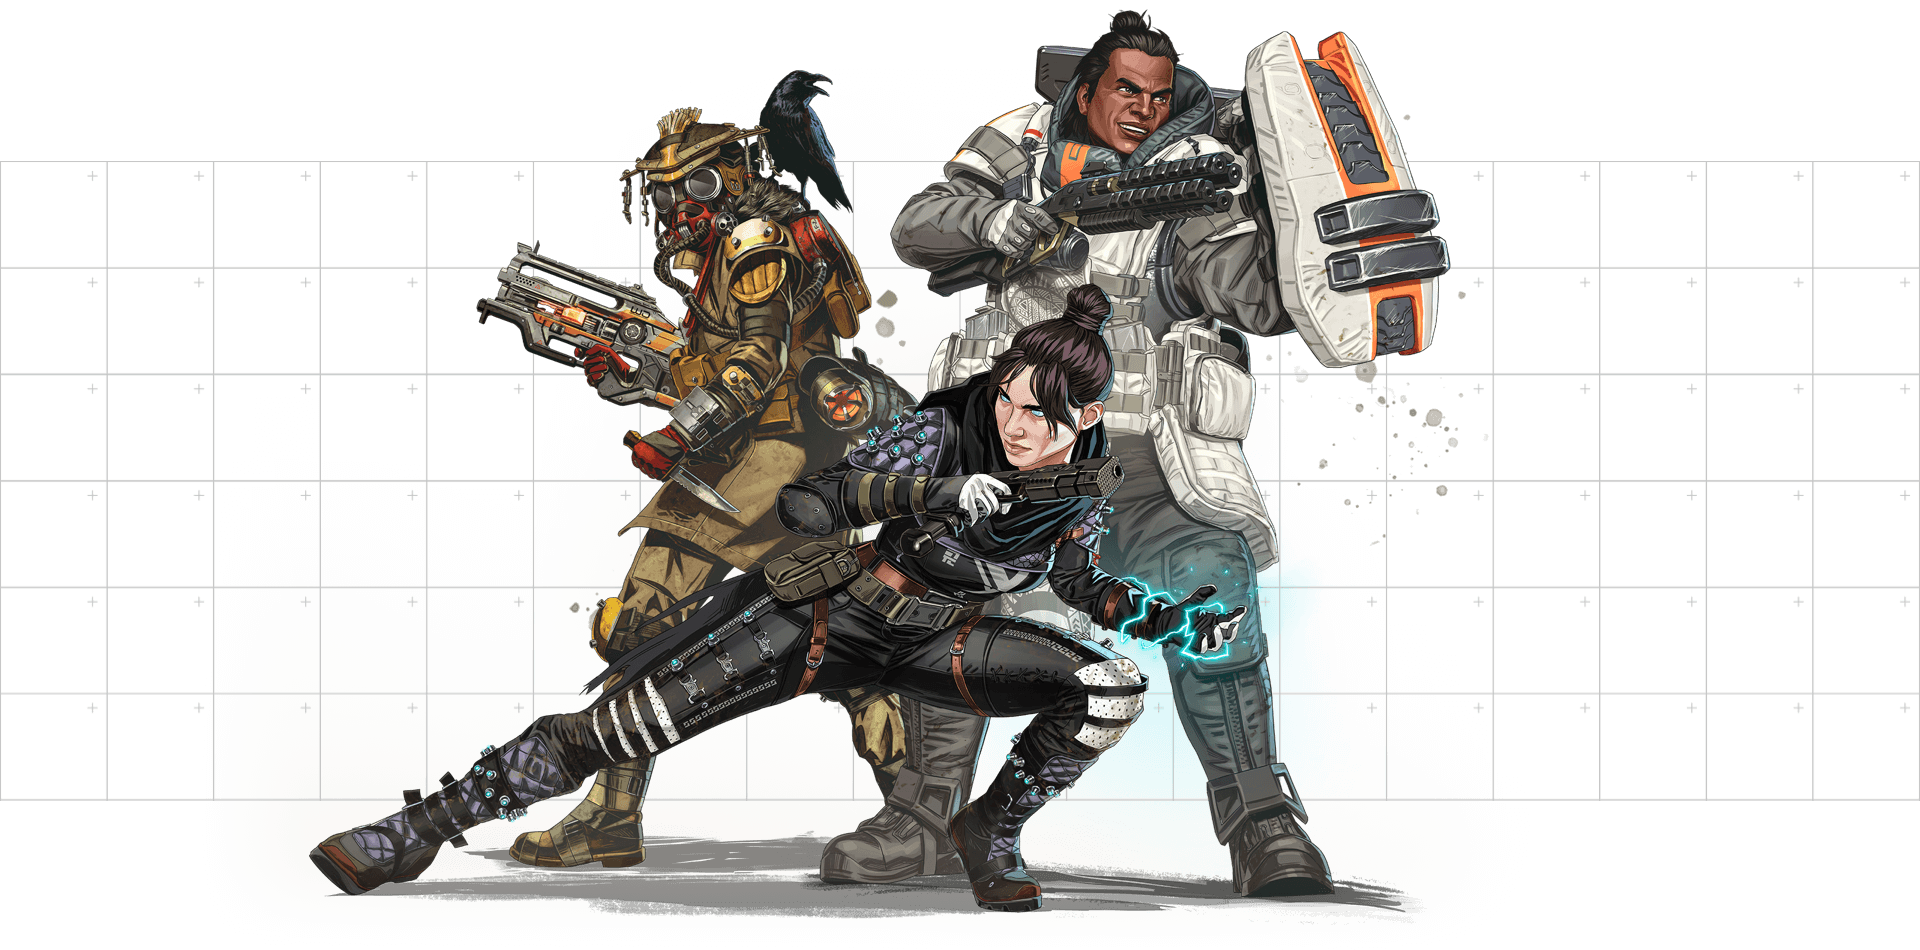 The third season of Apex Legends will be launching on October 1